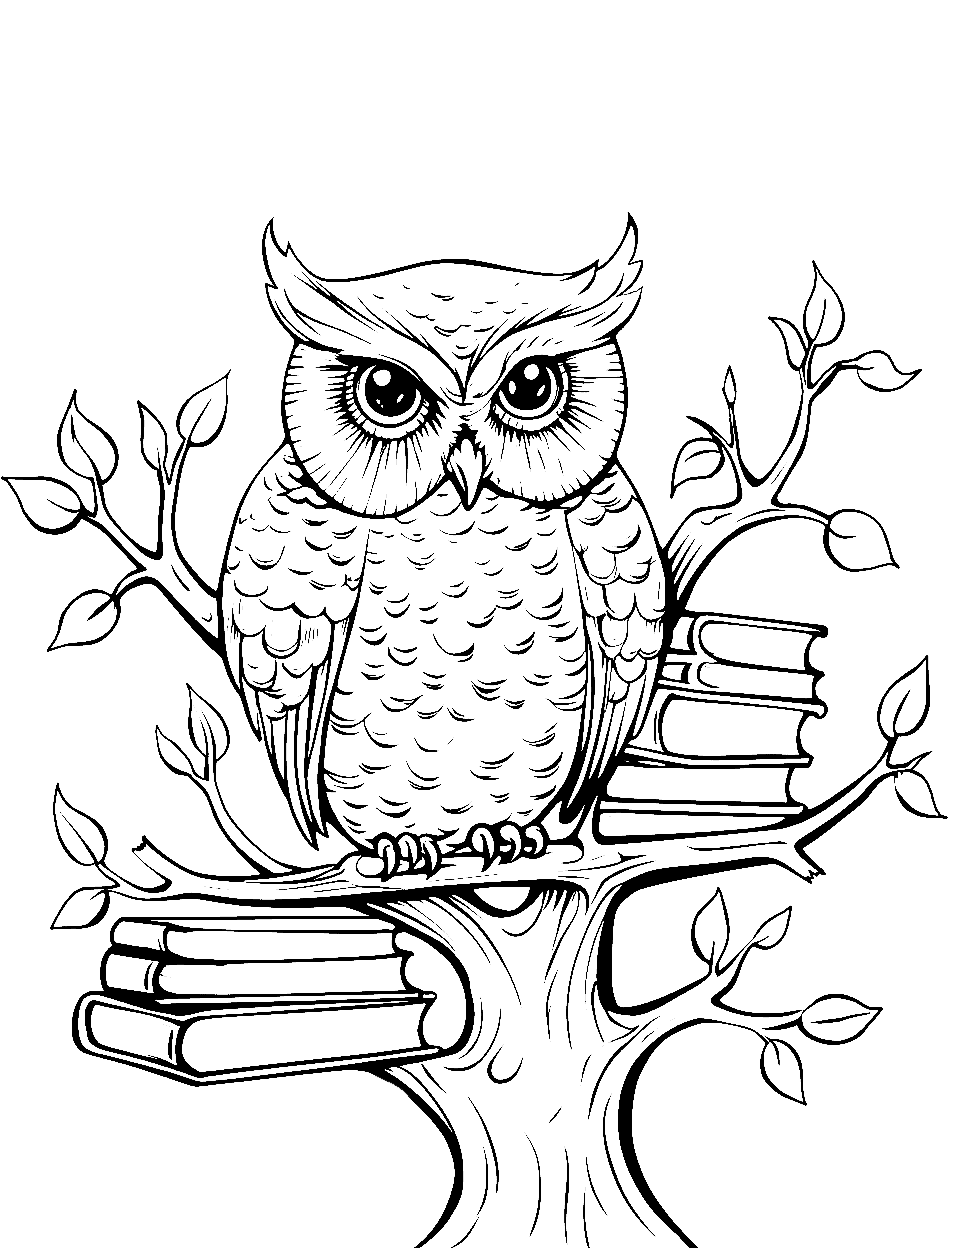 Owl's Wisdom Tree Coloring Page - A realistic depiction of Owl perched on a branch of his tree home, surrounded by open books and scrolls.